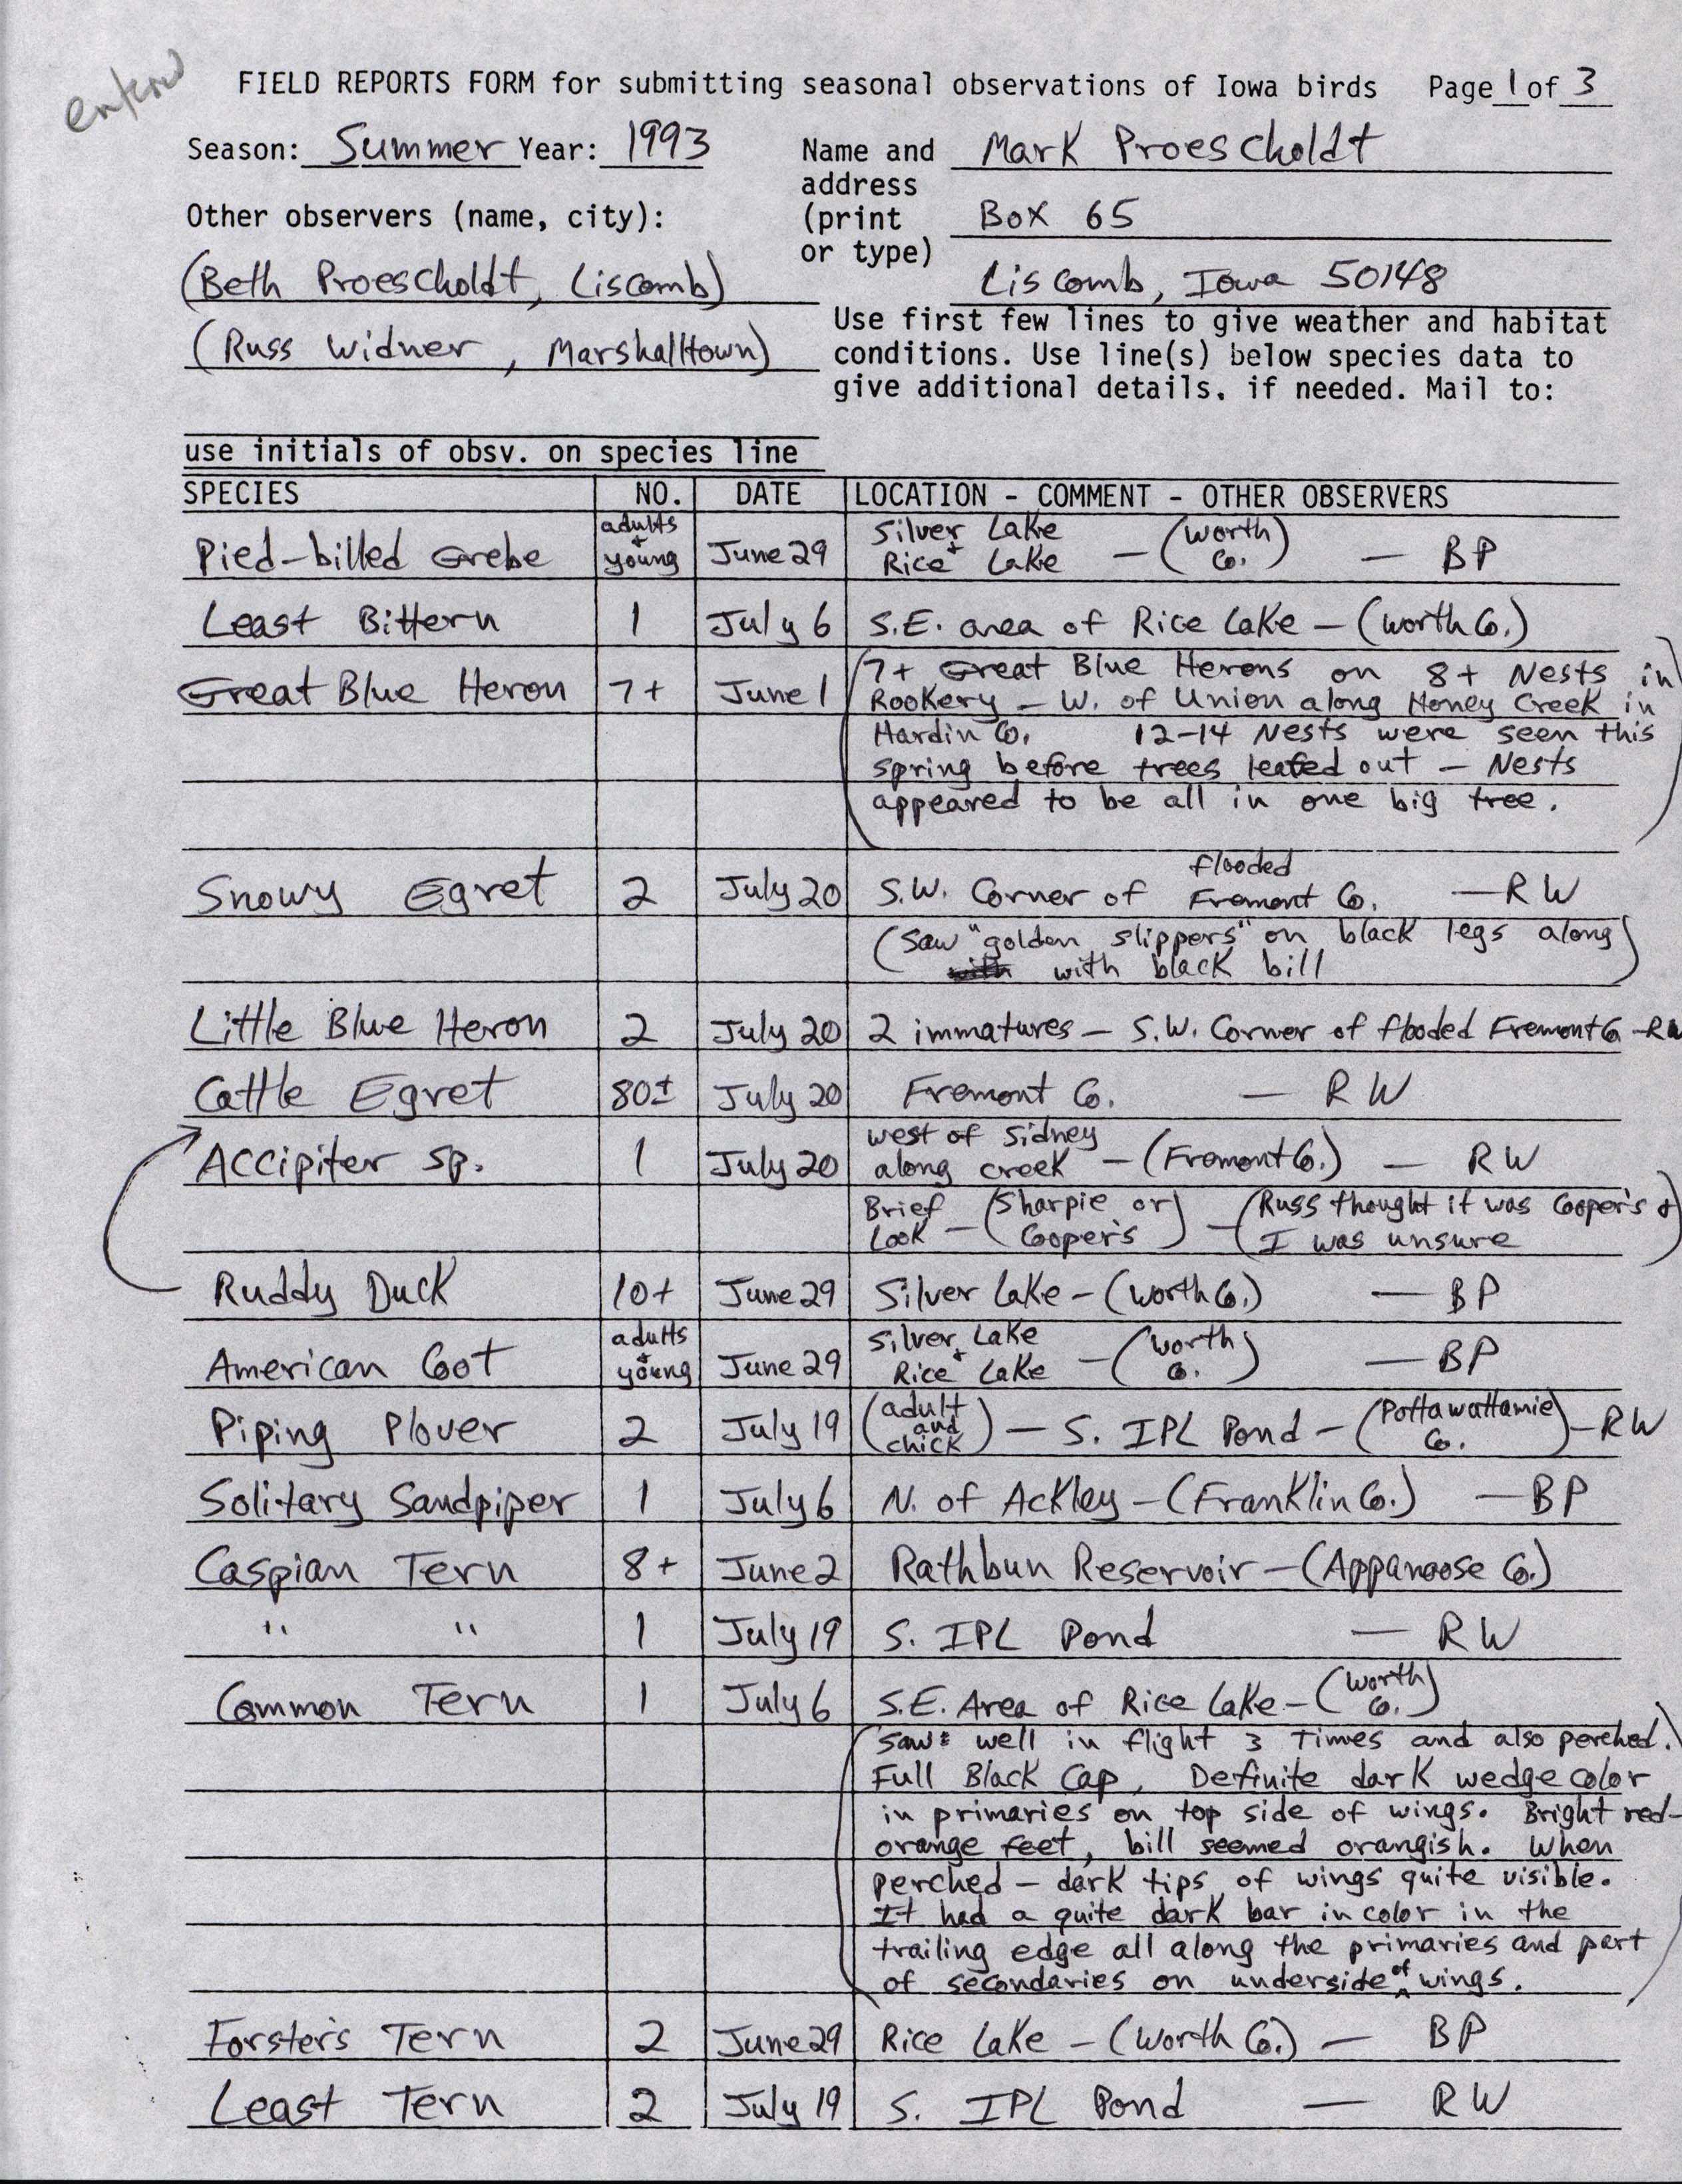 Field reports form for submitting seasonal observations of Iowa birds, Mark Proescholdt, summer 1993